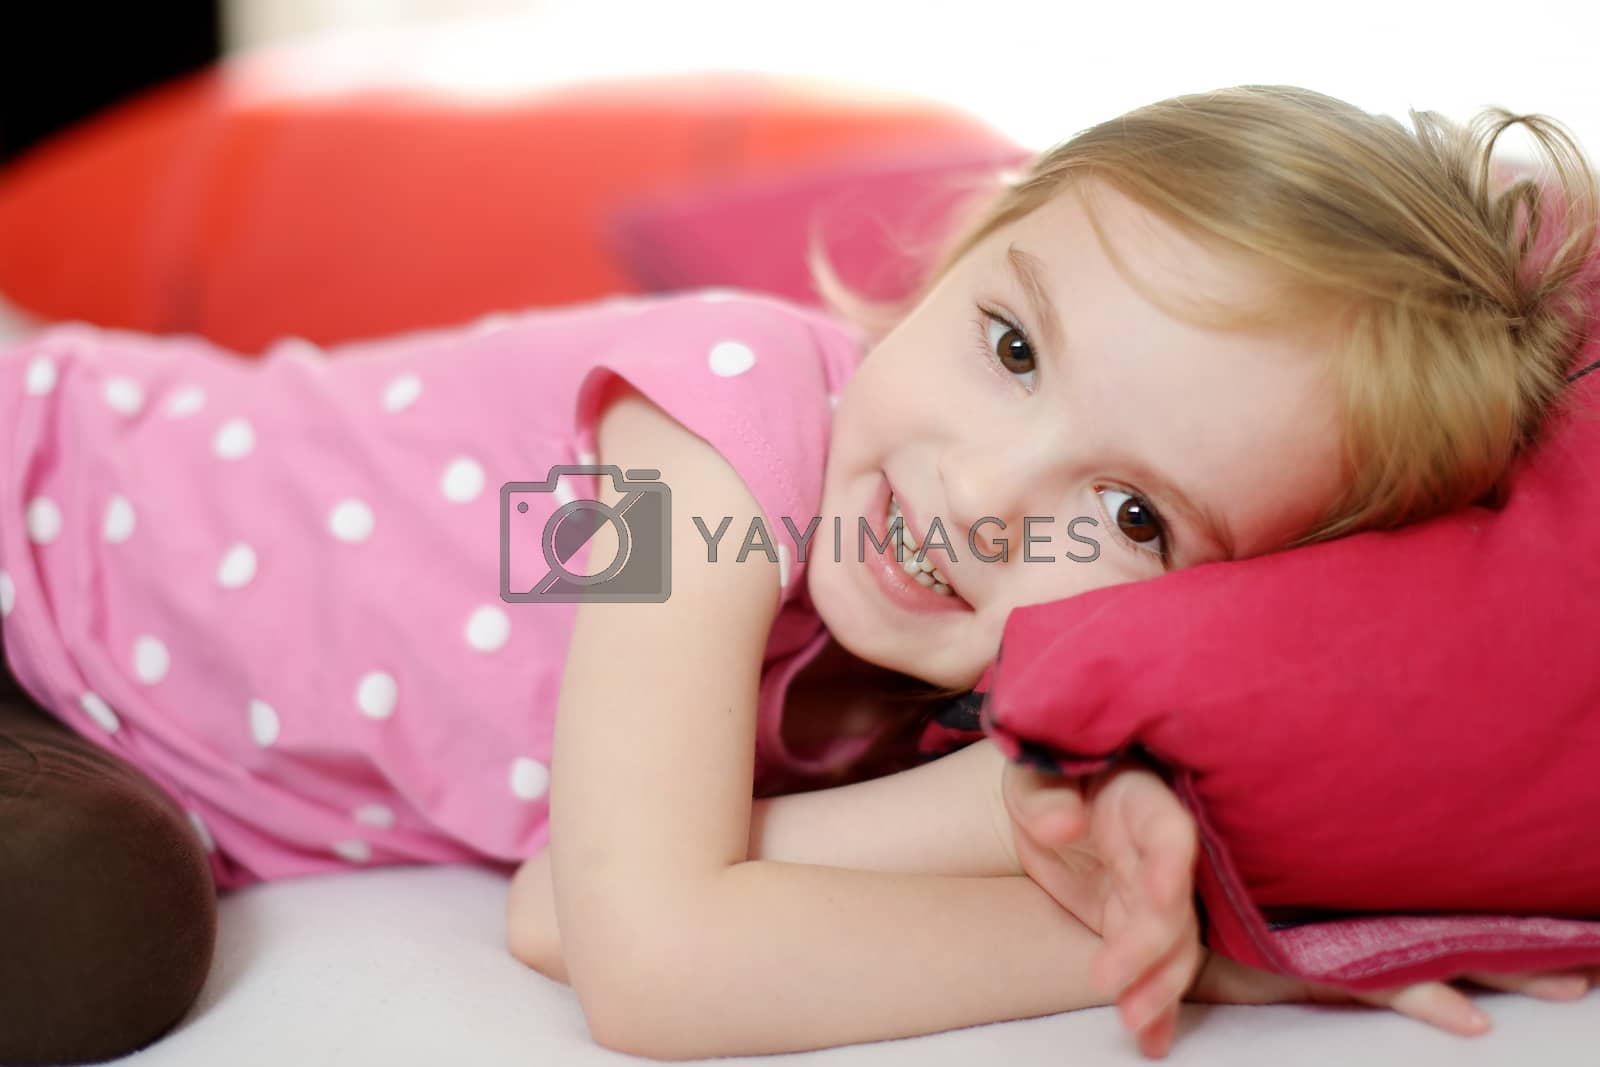 Royalty free image of Little toddler girl in pajamas by maximkabb